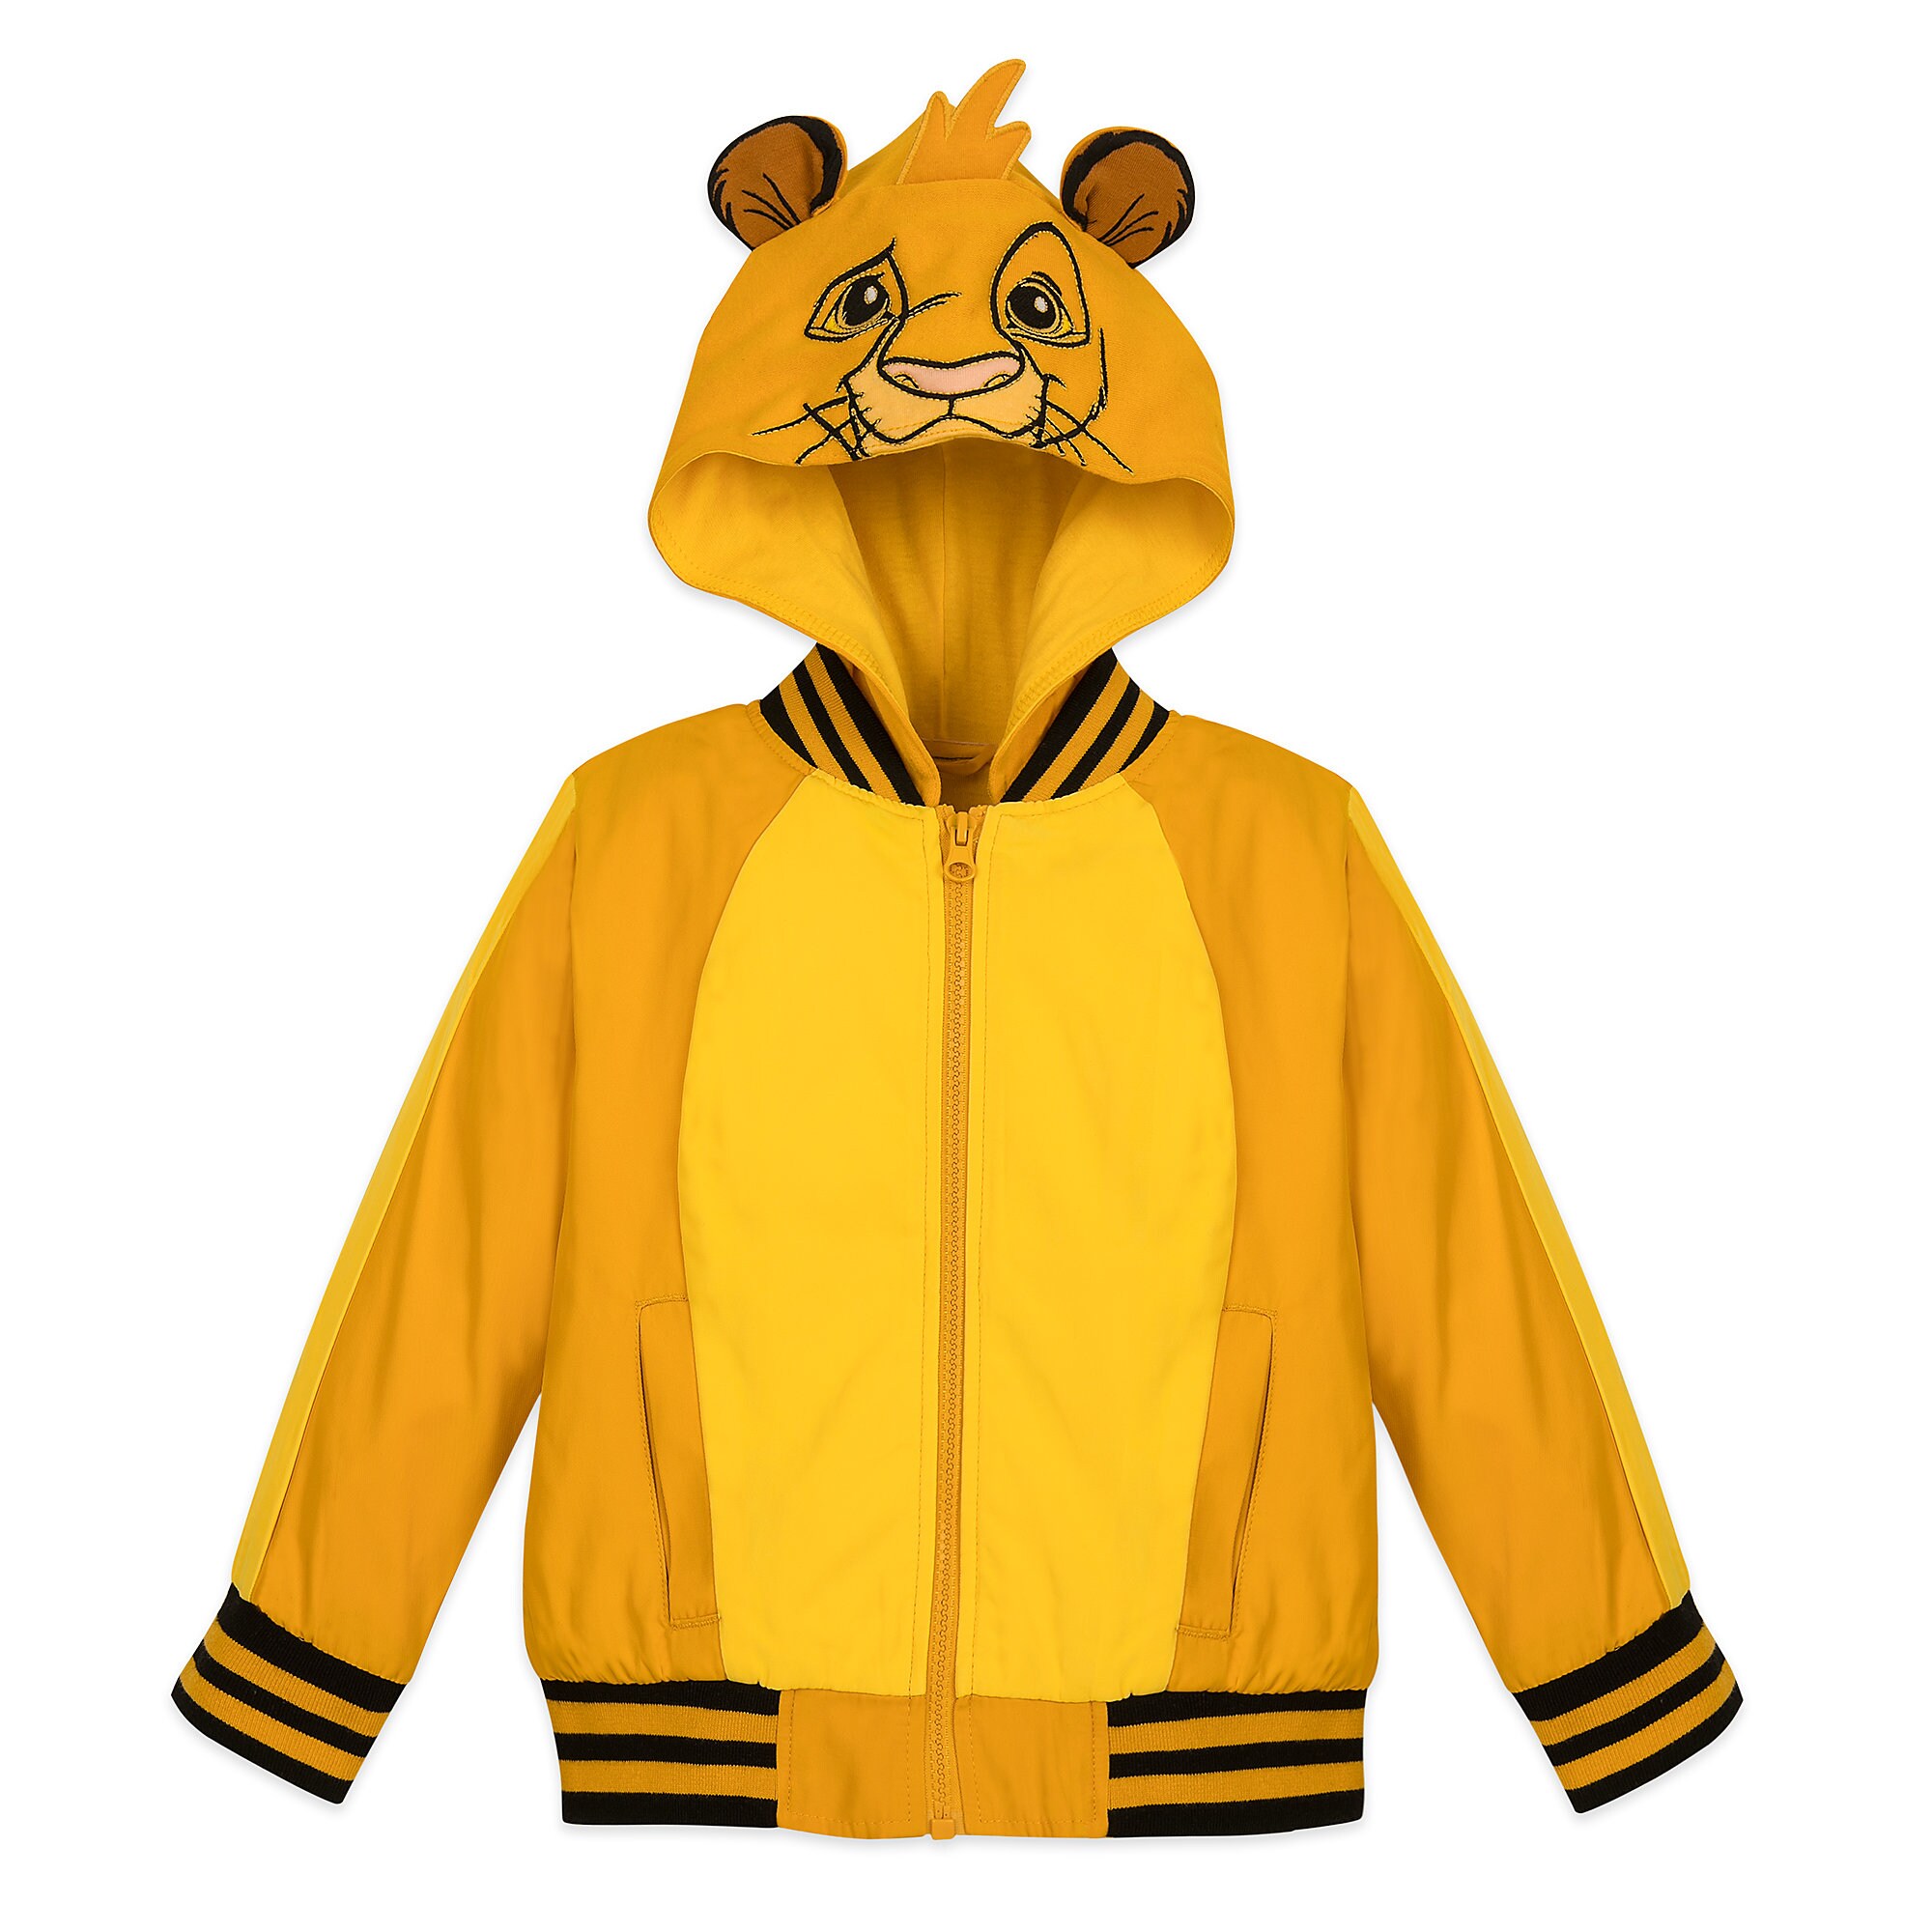 Simba Hooded Jacket for Boys - The Lion King